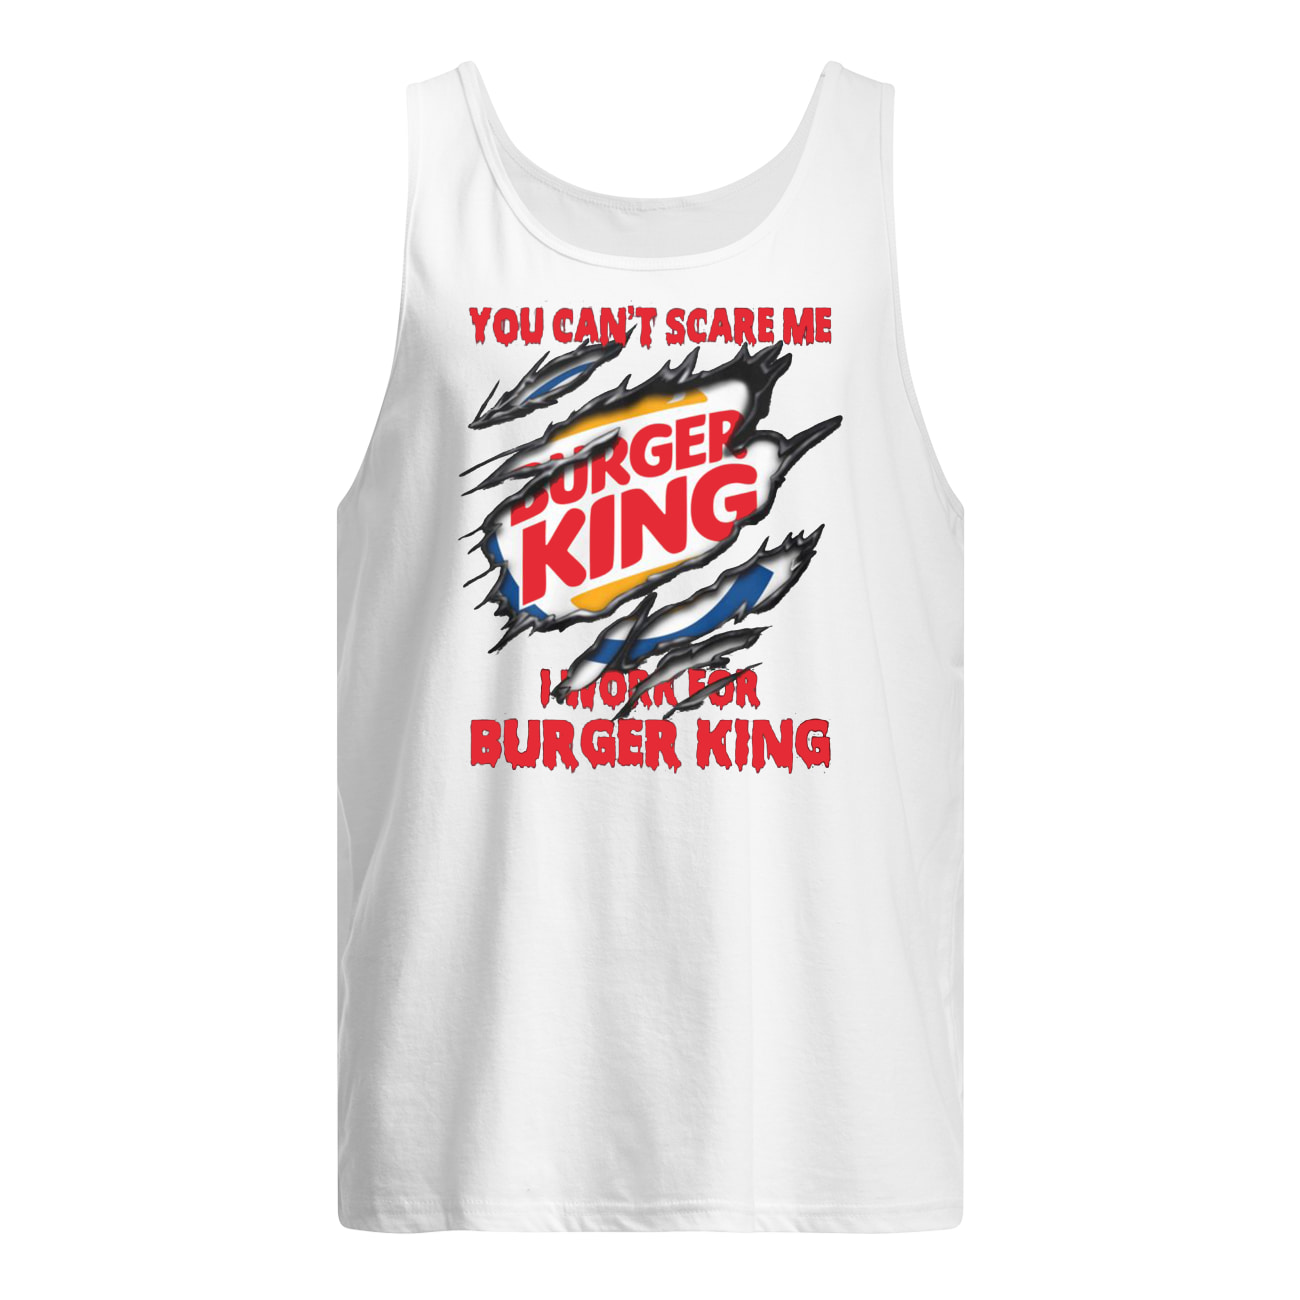 You can't scare me I work for burger king tank top